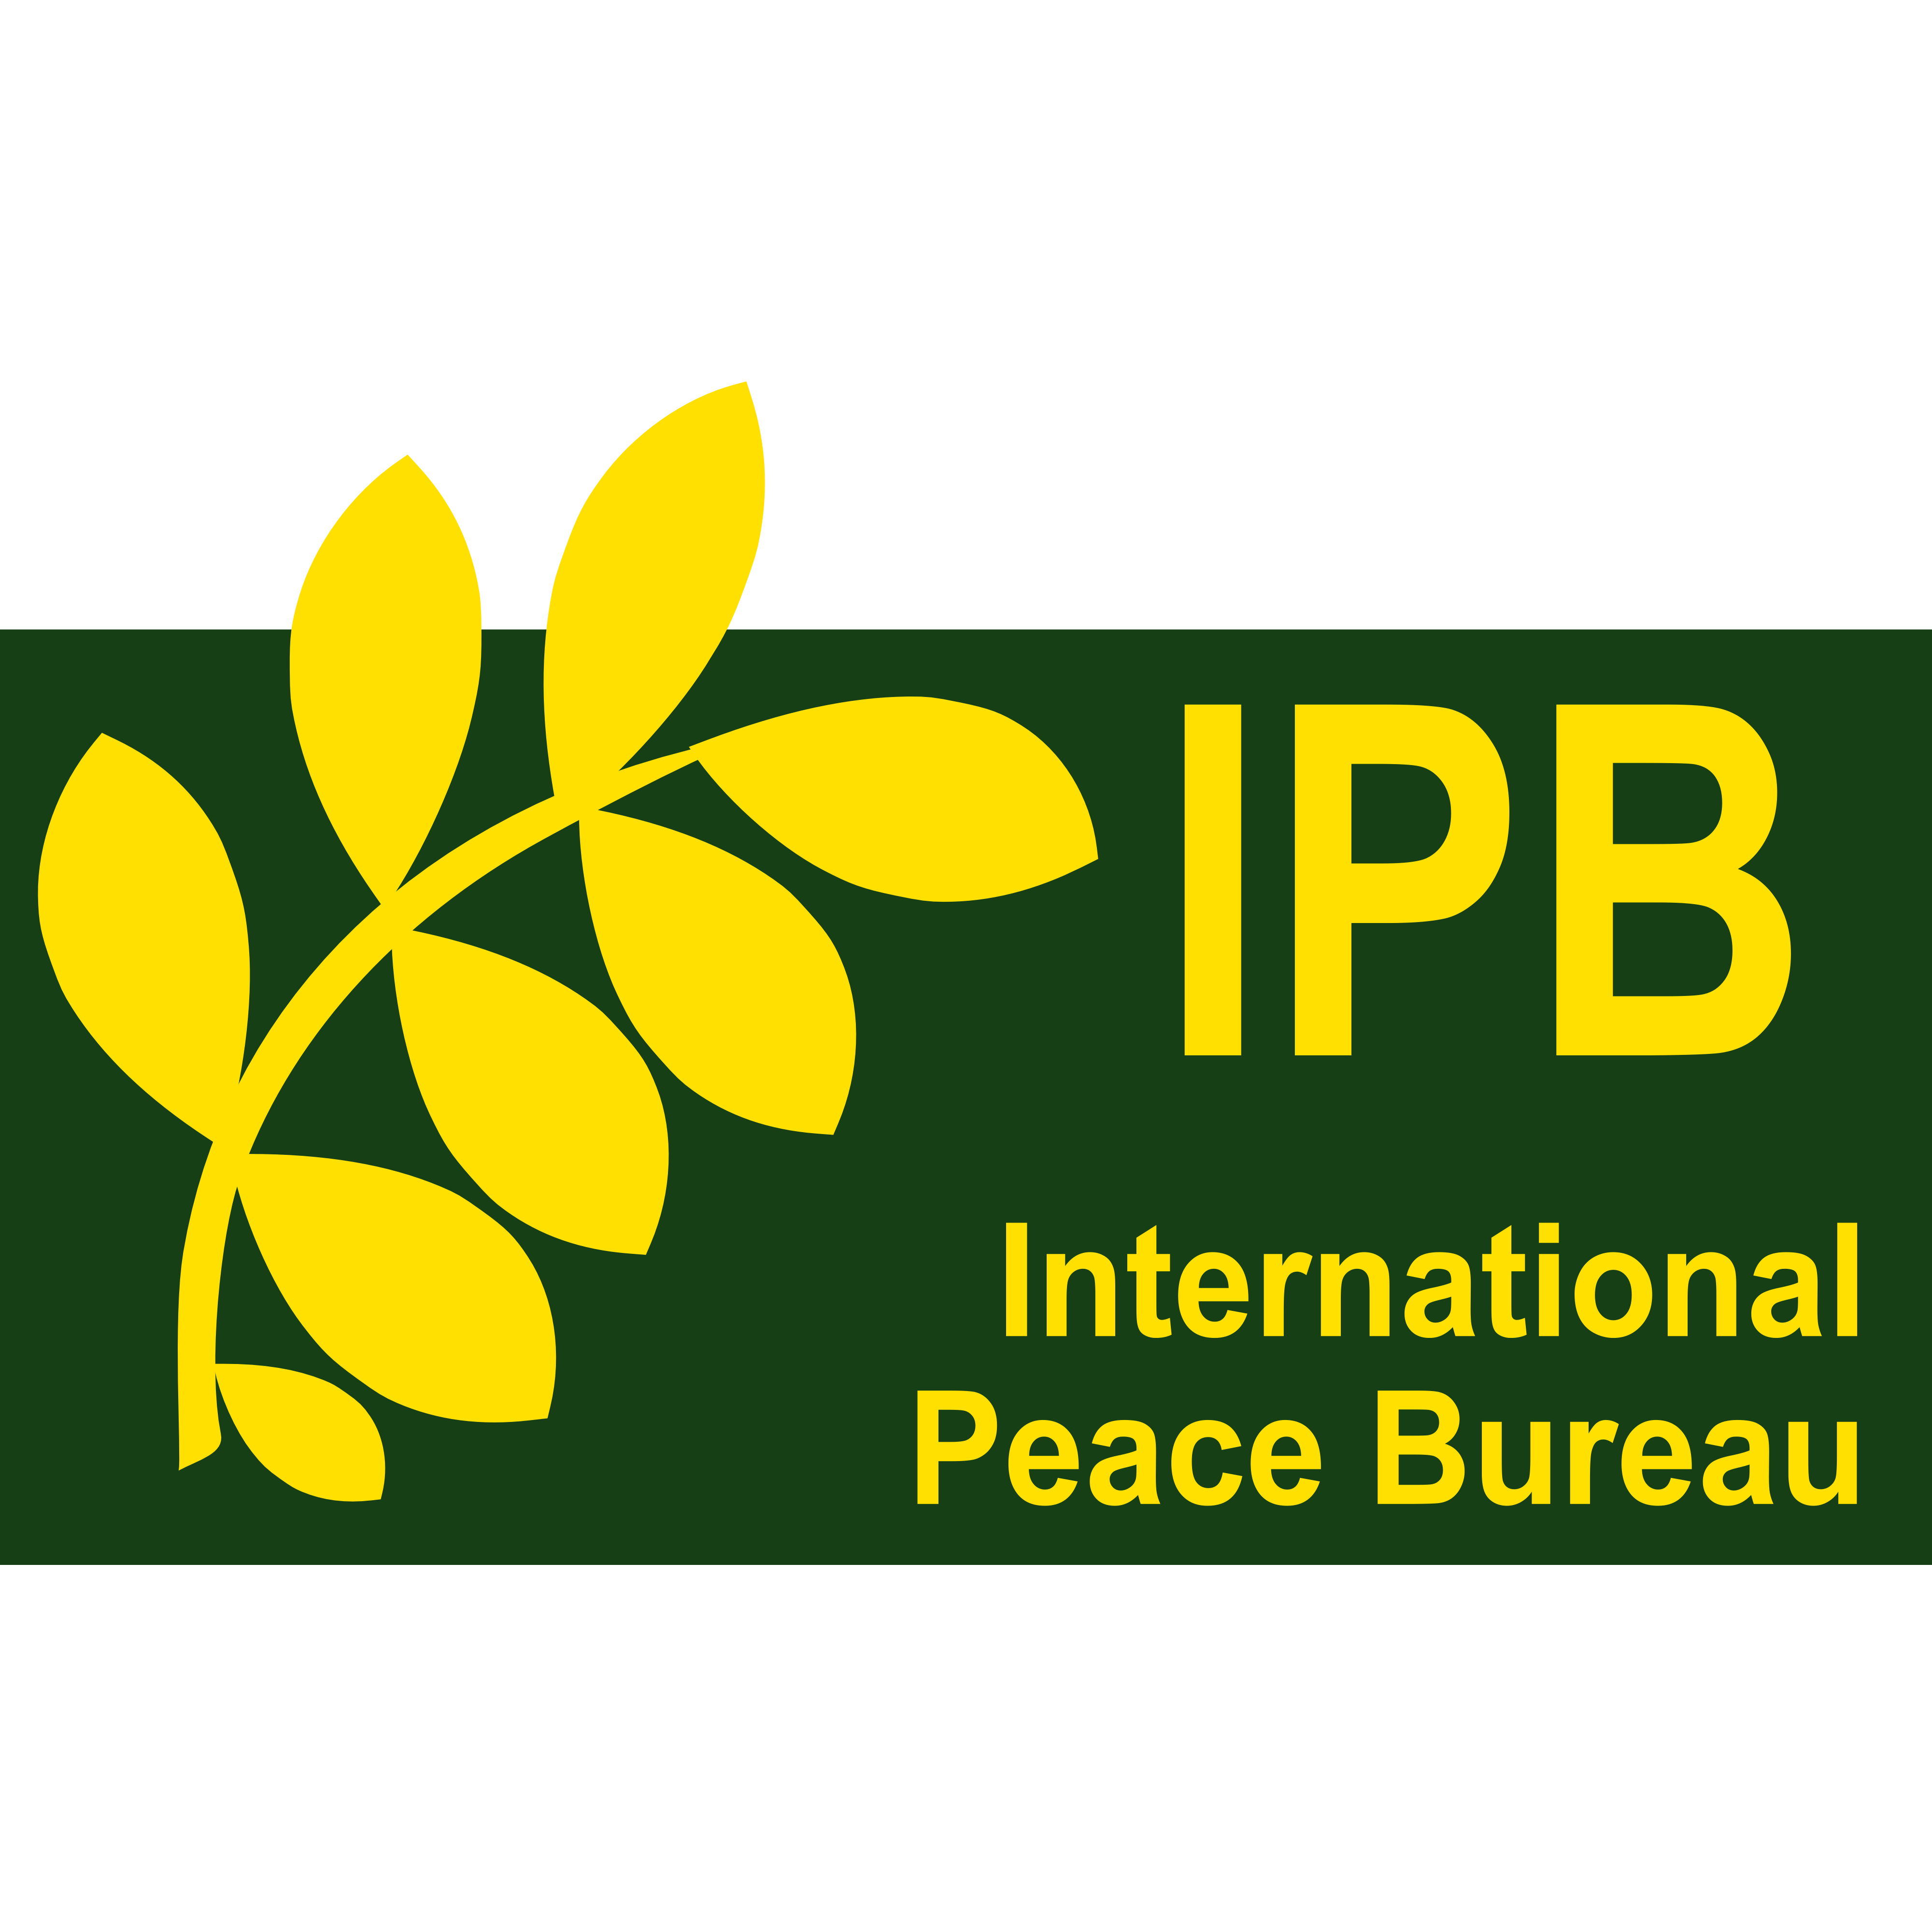 İEPF joined the statement of the International Peace Bureau